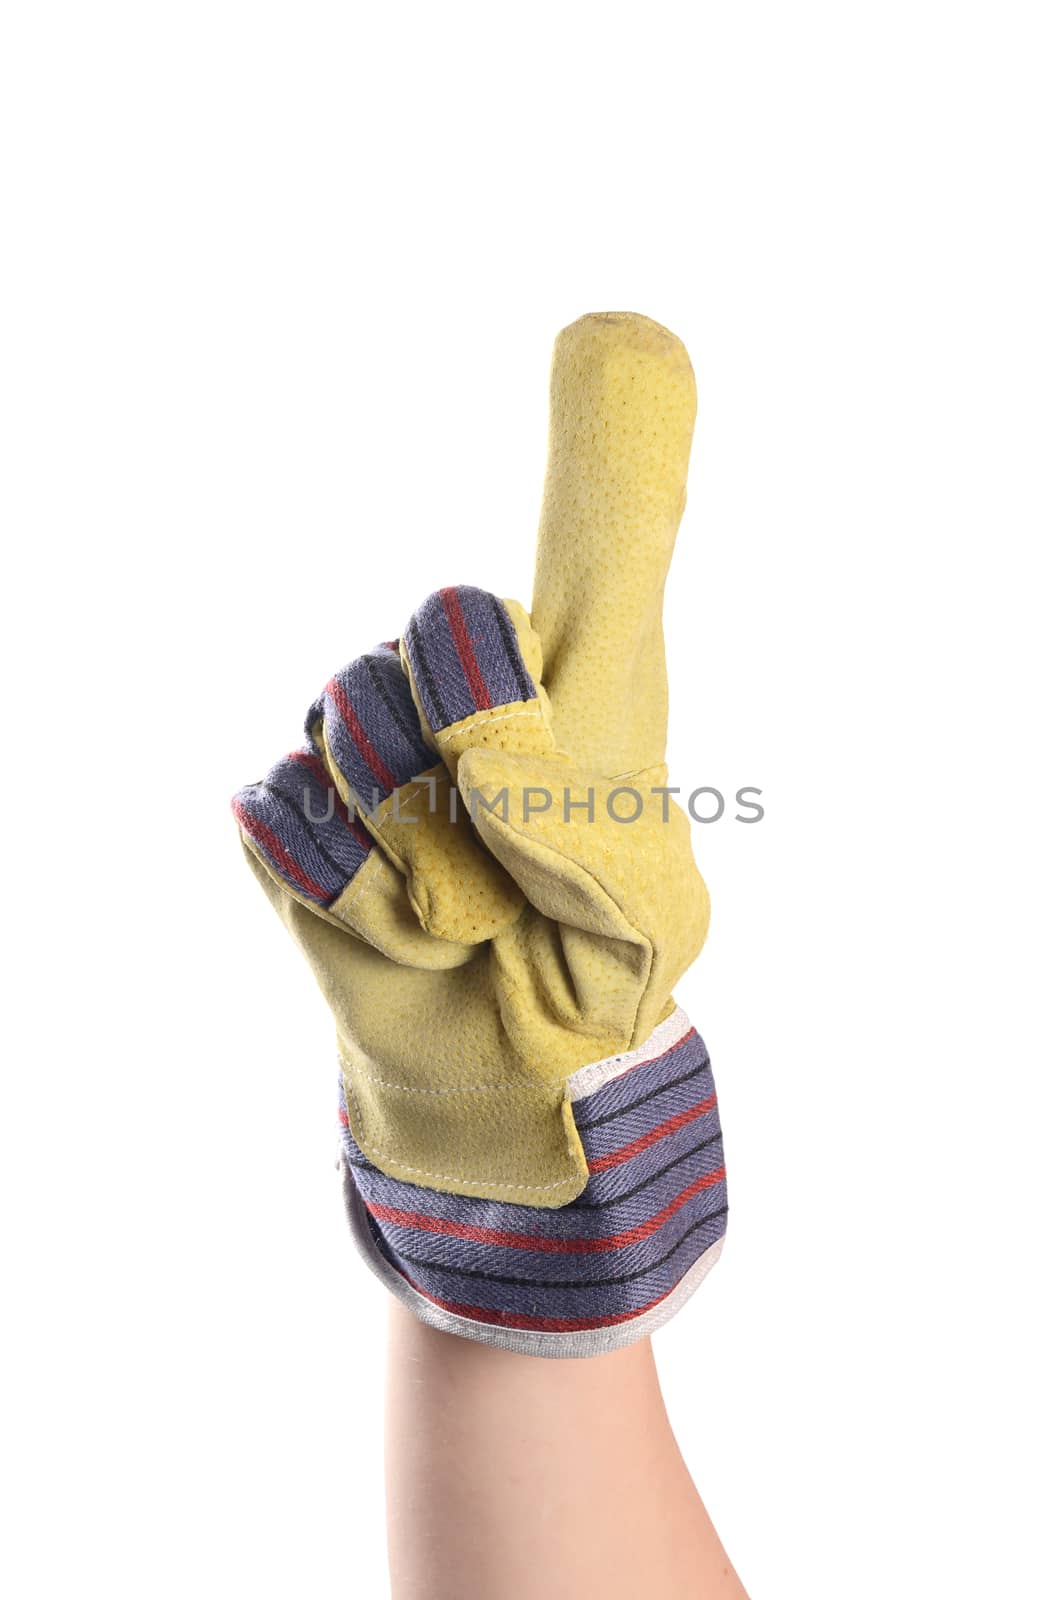 Working mens gloves isolated on white background